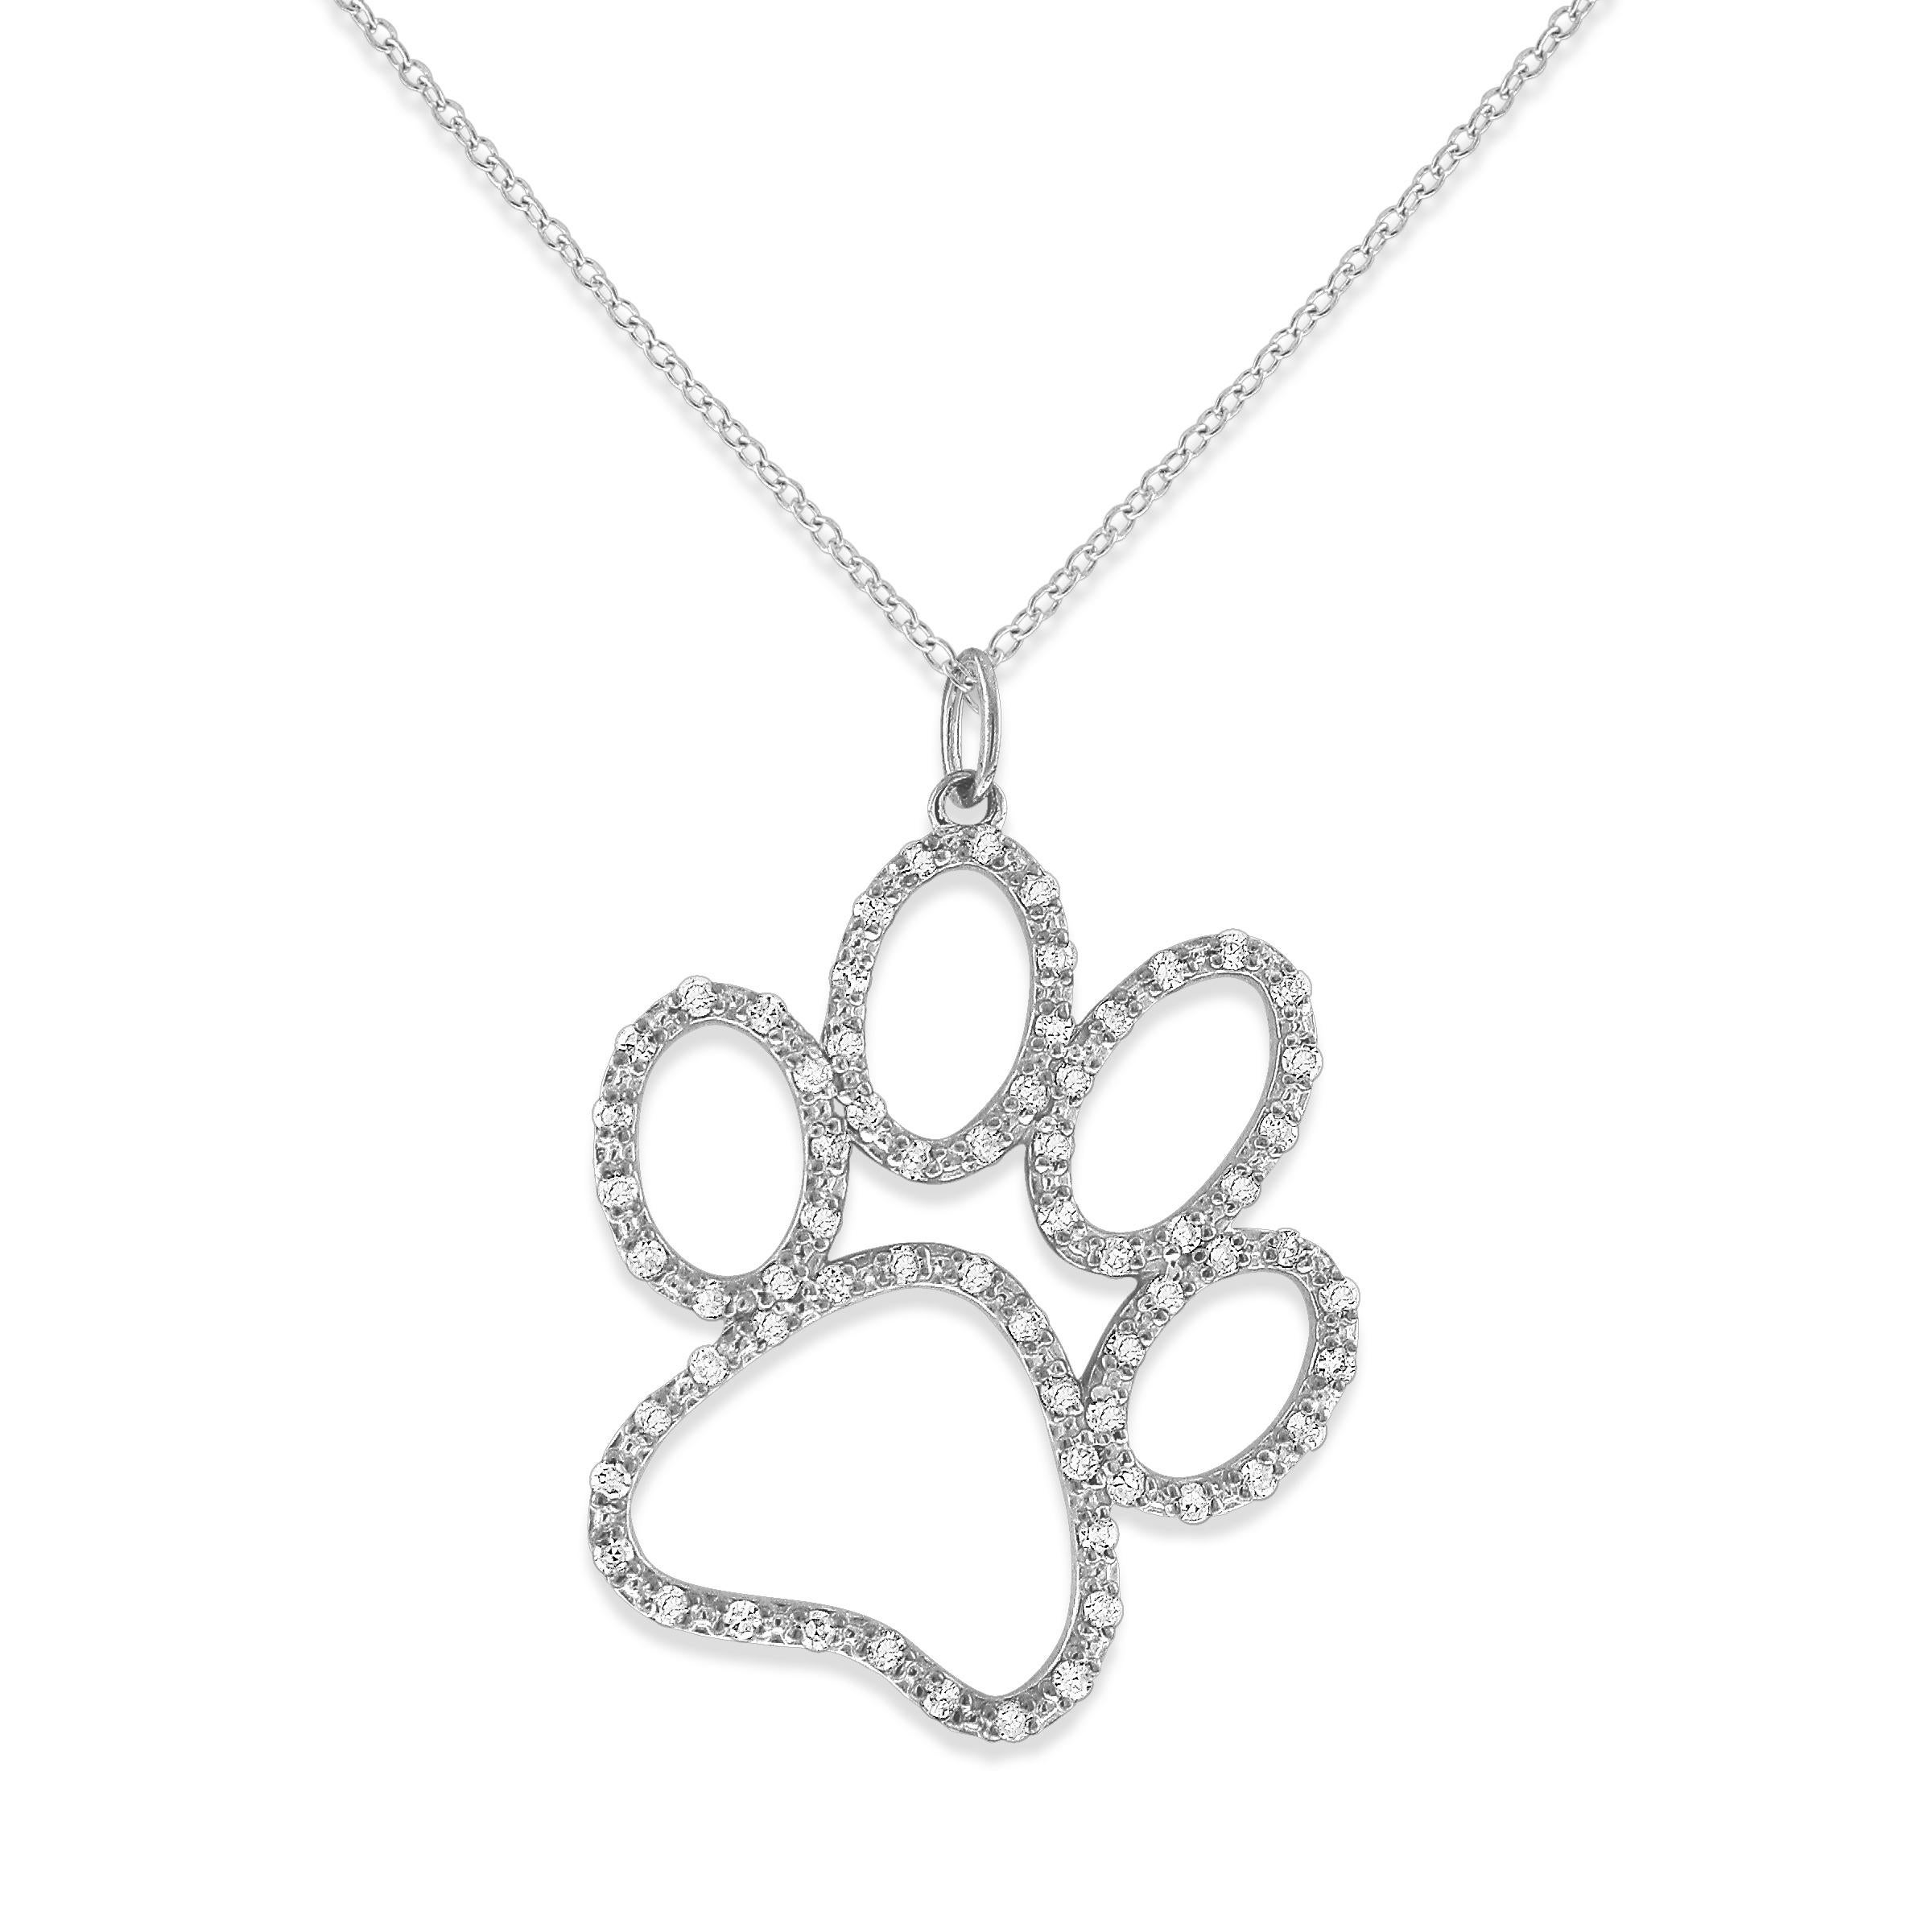 This stunning diamond Paw necklace features 0.33 carats of round brilliant cut diamonds, set in 14k yellow gold.  Superbly crafted by KC Designs.

#165-041